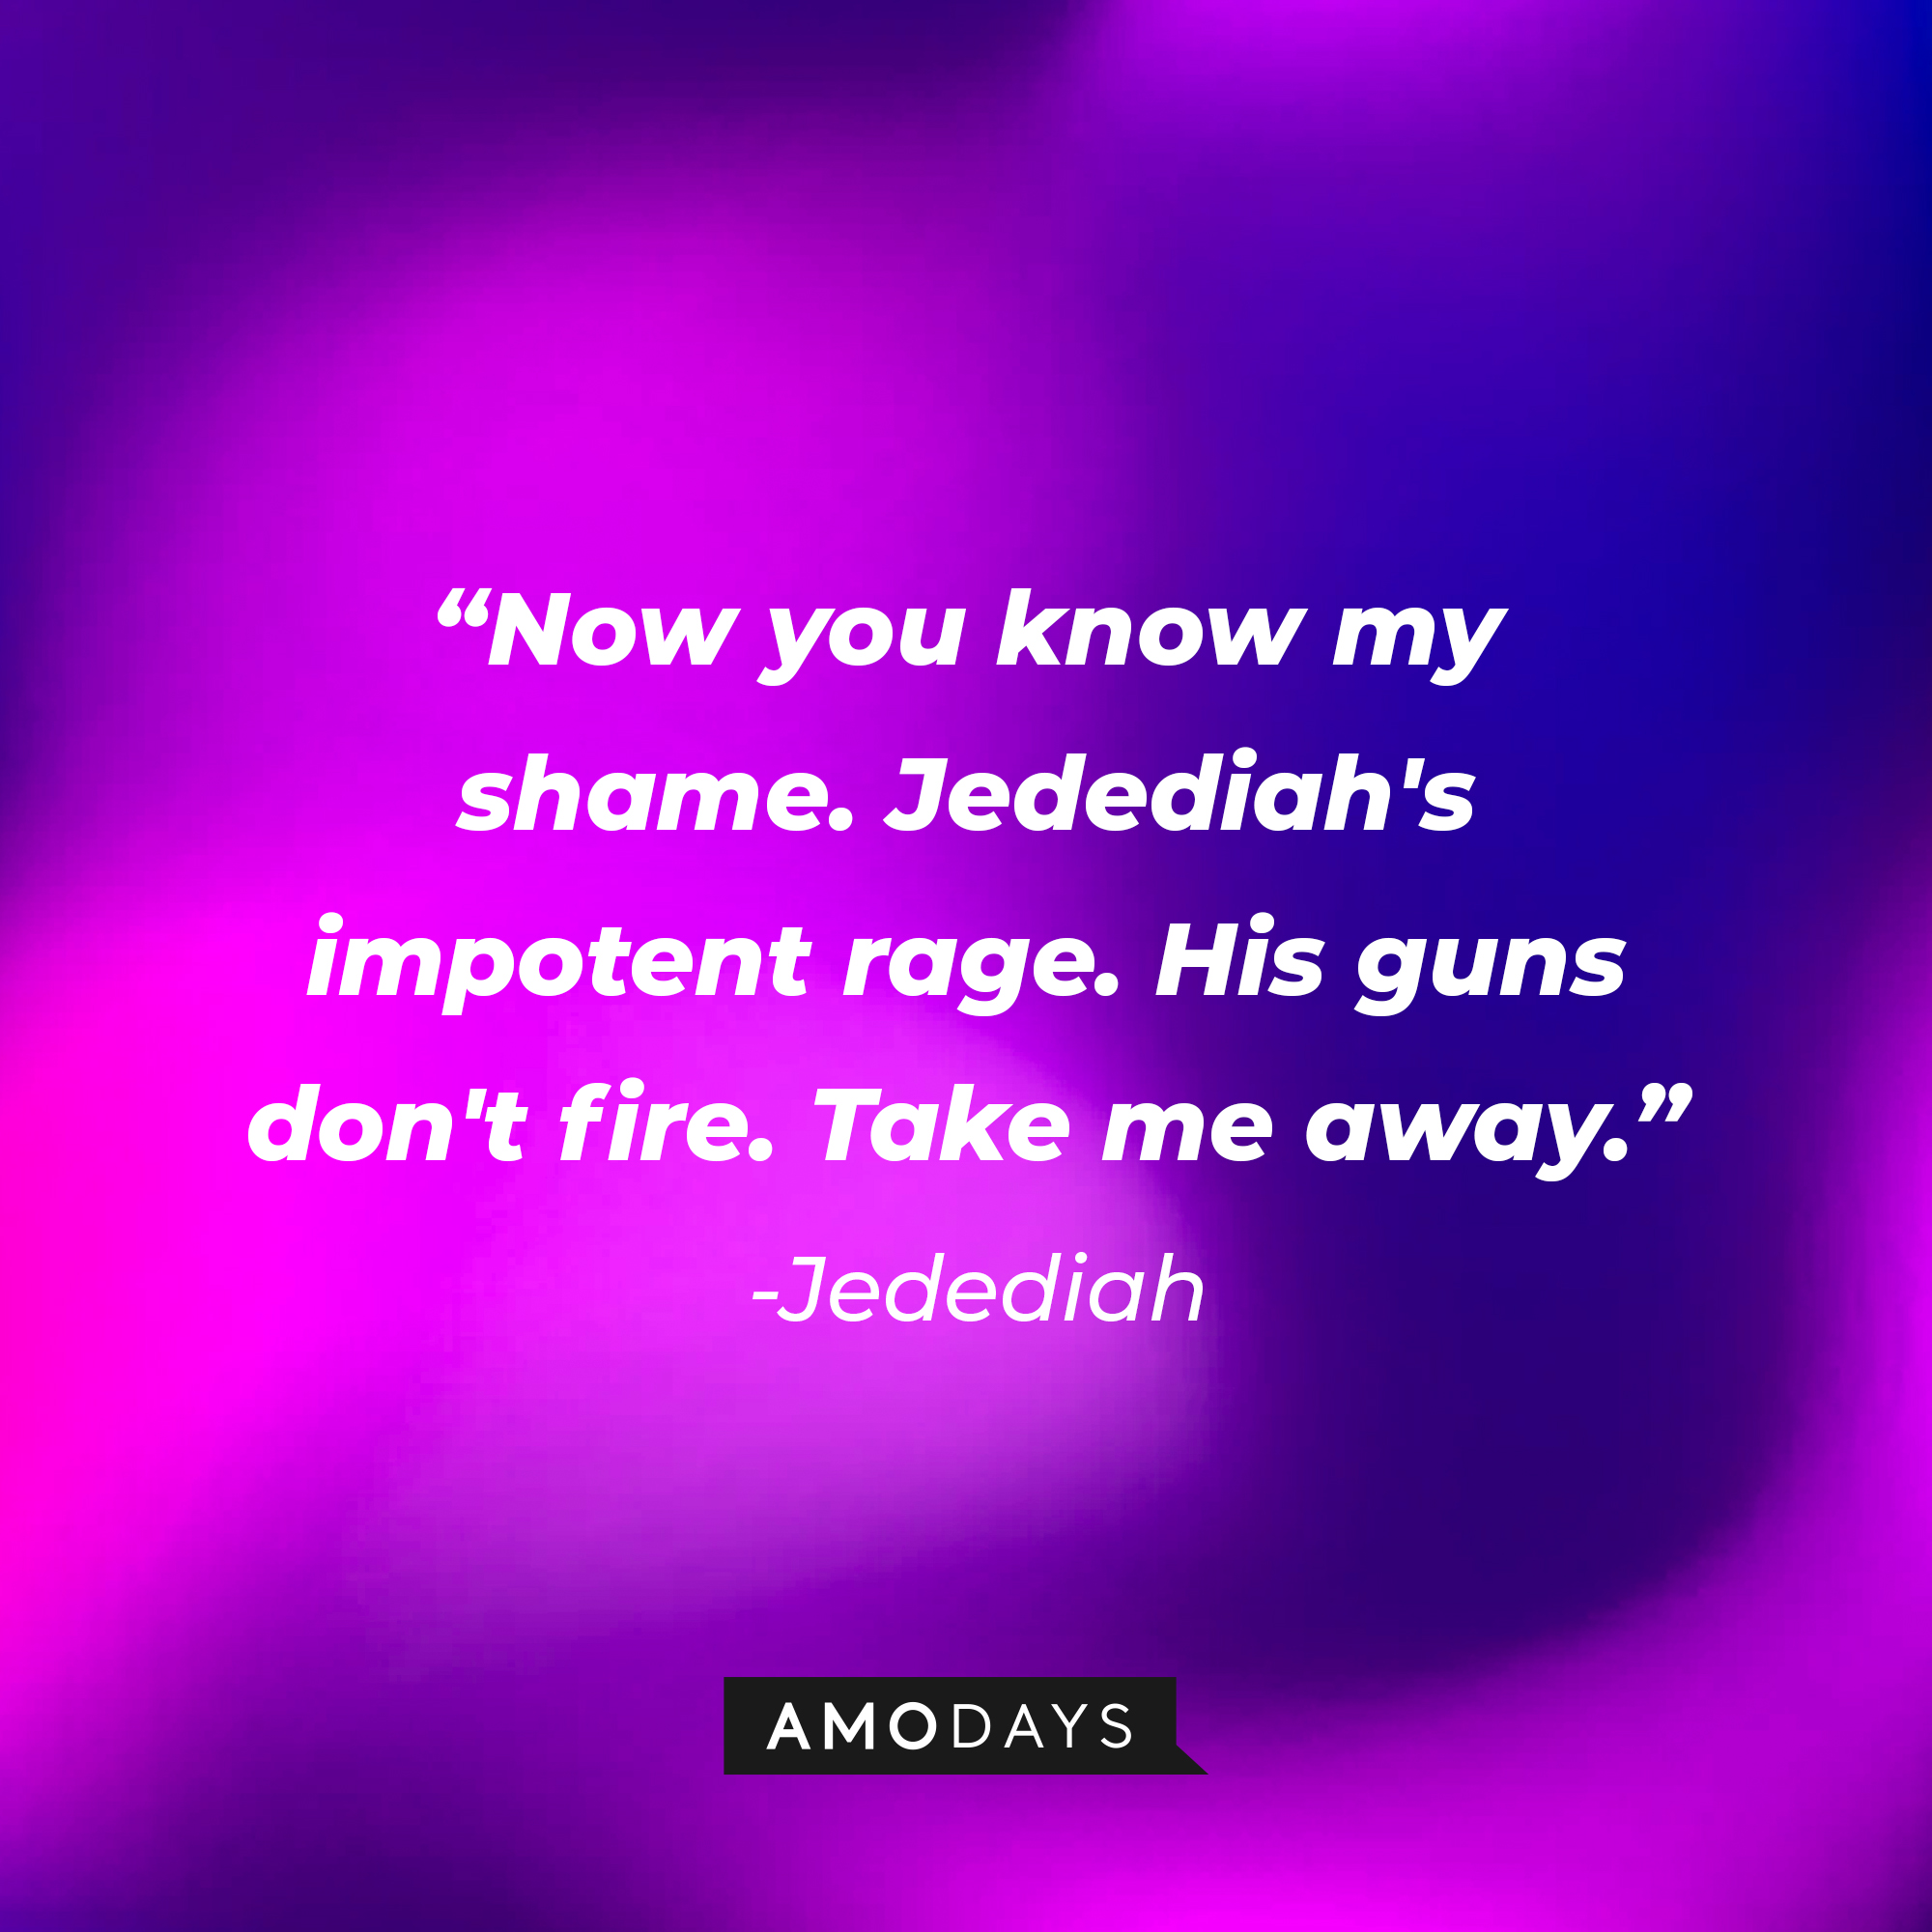 Jedediah's quote: “Now you know my shame. Jedediah's impotent rage. His guns don't fire. Take me away.” | Source: Amodays